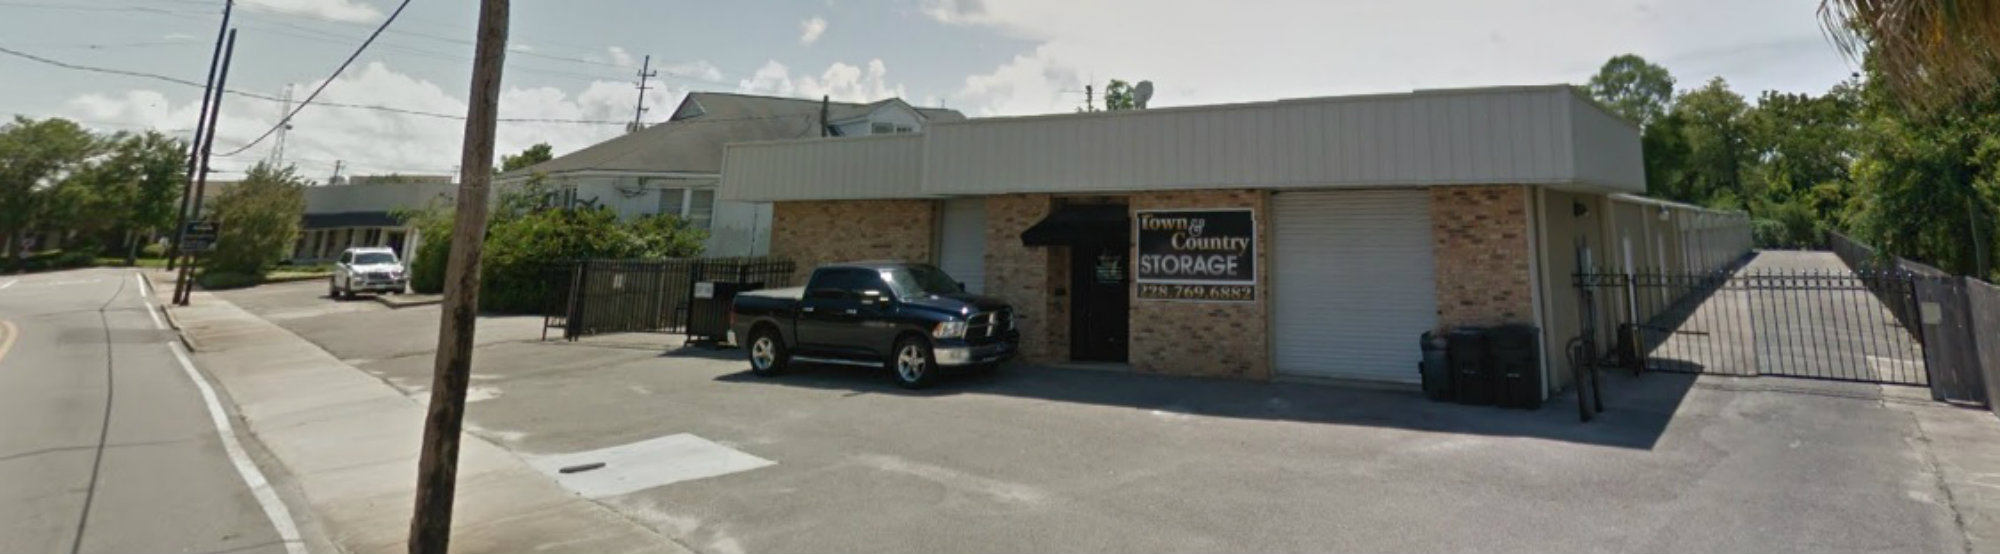 Storage in Pascagoula, MS